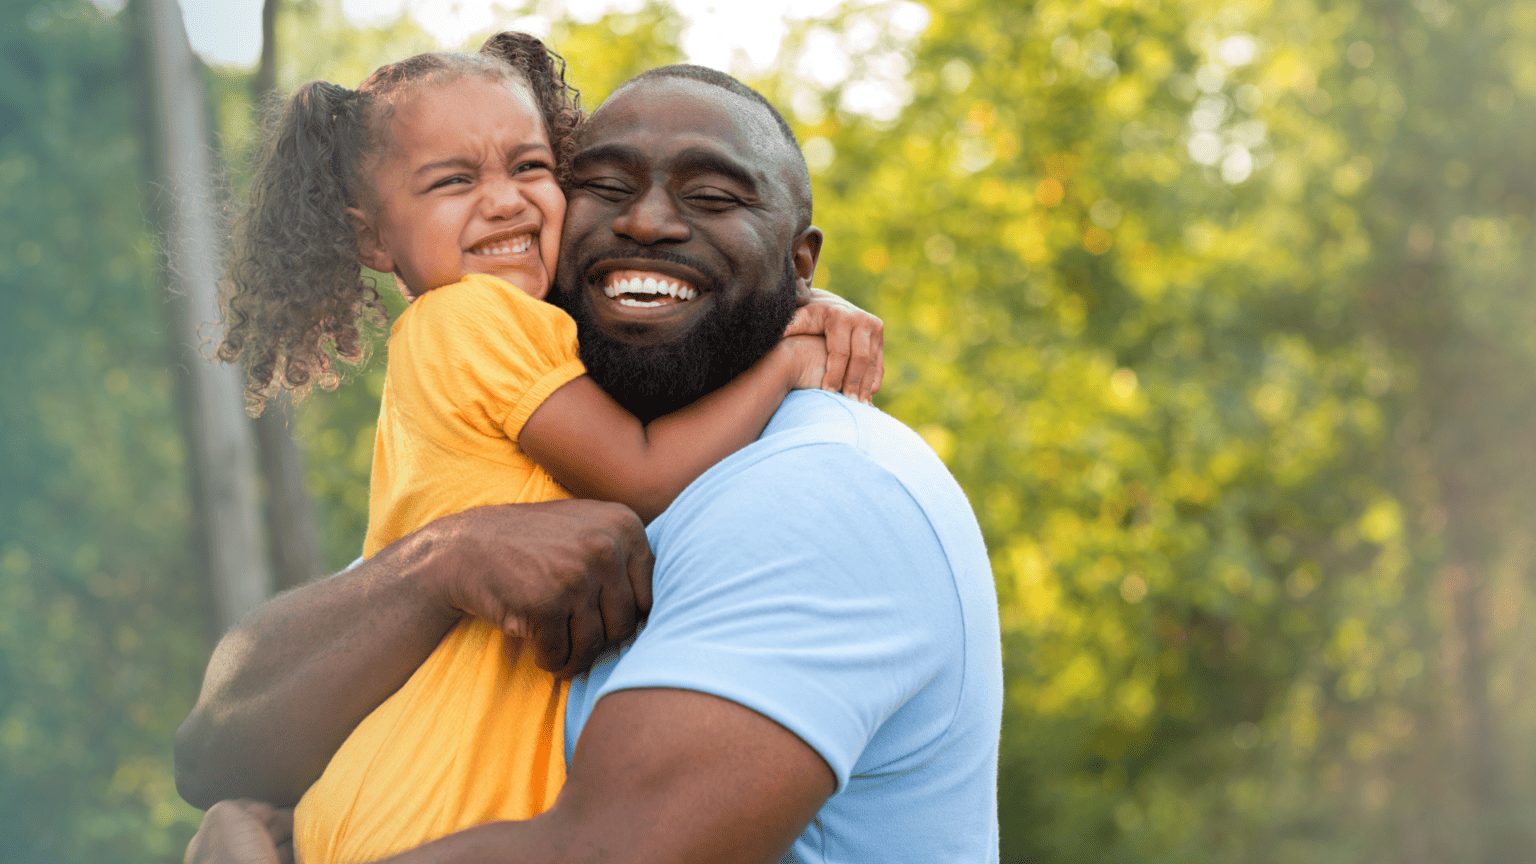 13 Lessons Dads Can Teach Their Daughters - Focus on the Family